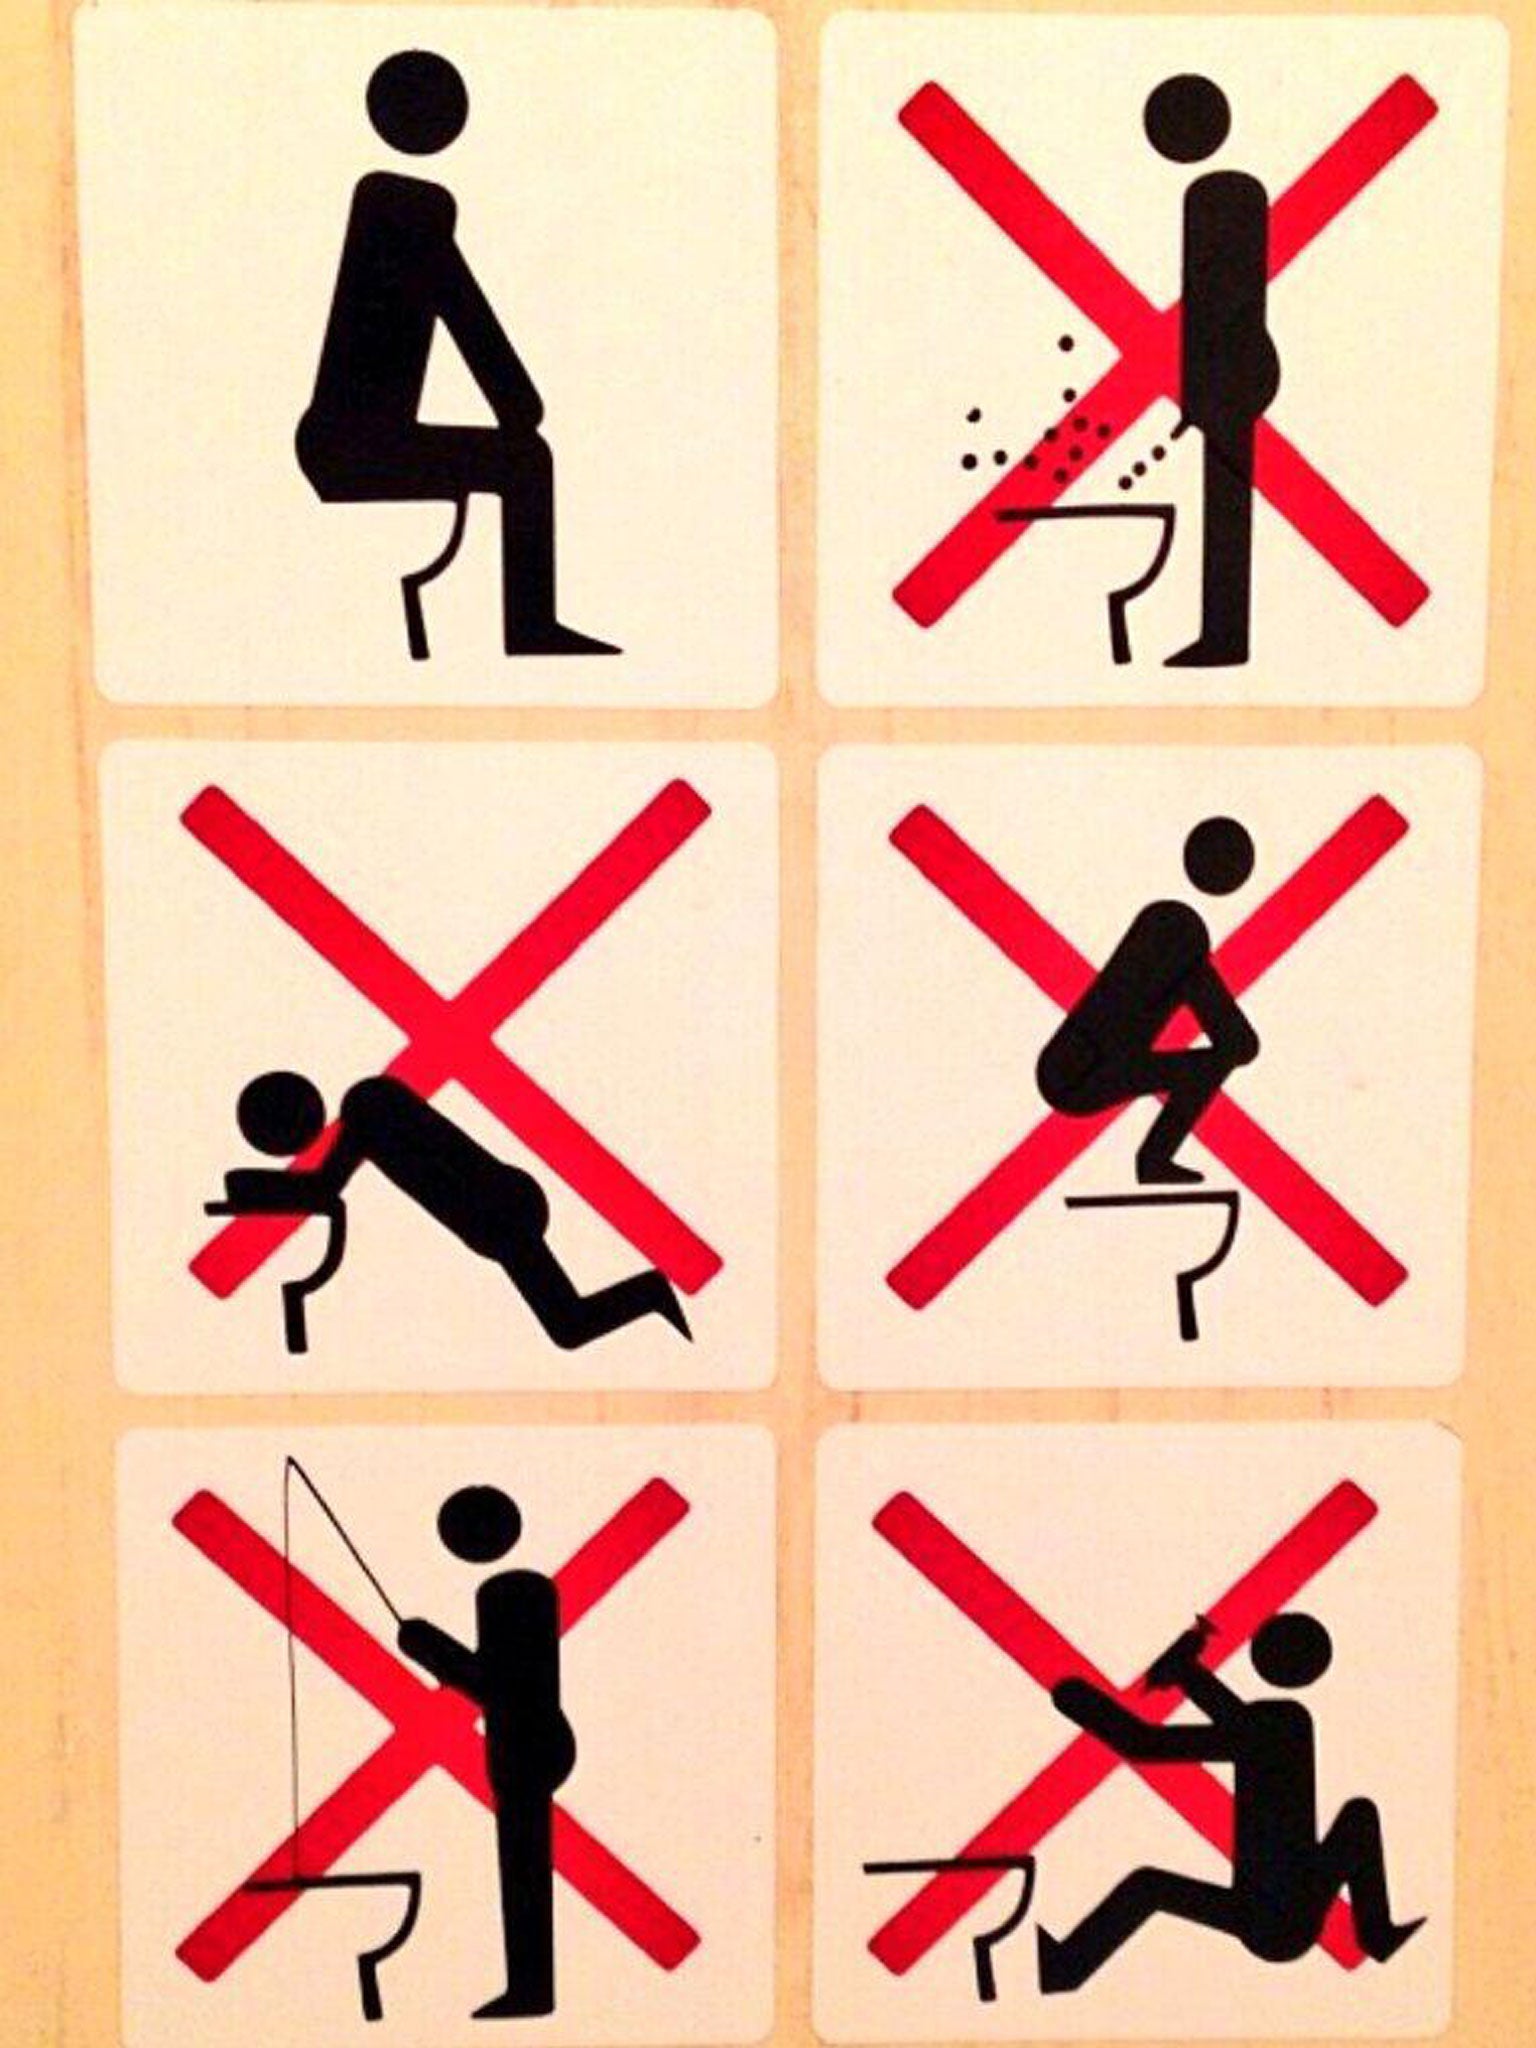 This image posted was posted to Twitter by Canadian snowboarder Sebastien Toutant, with the caption: 'Well that's interesting... Sochi rules in the bathrooms!'